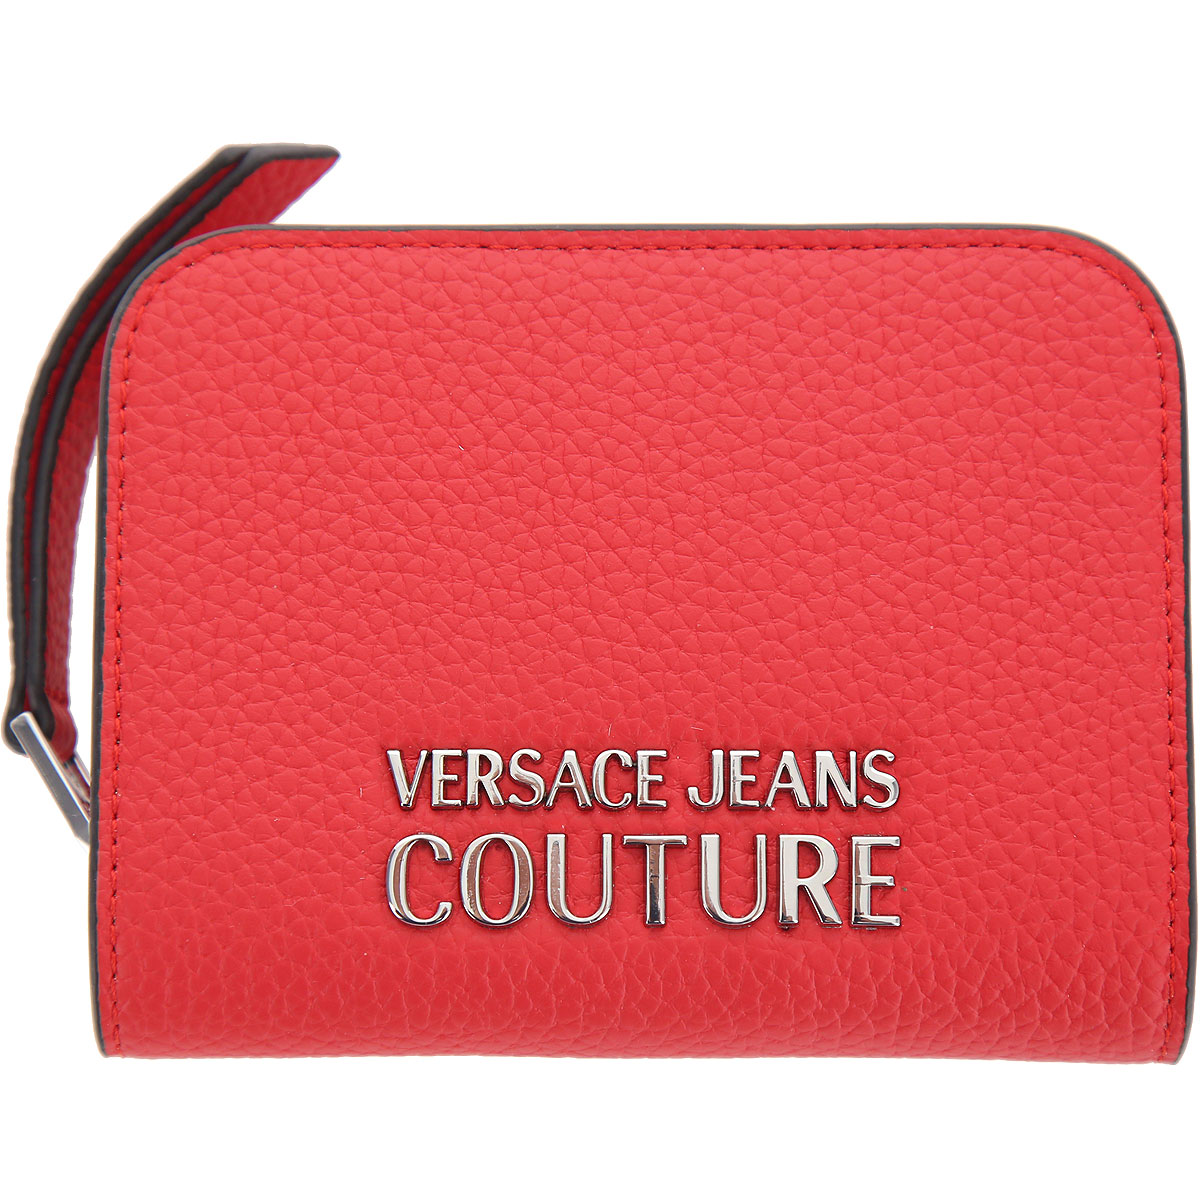 Womens Wallets Versace Jeans Couture , Style code: 75va5pb2